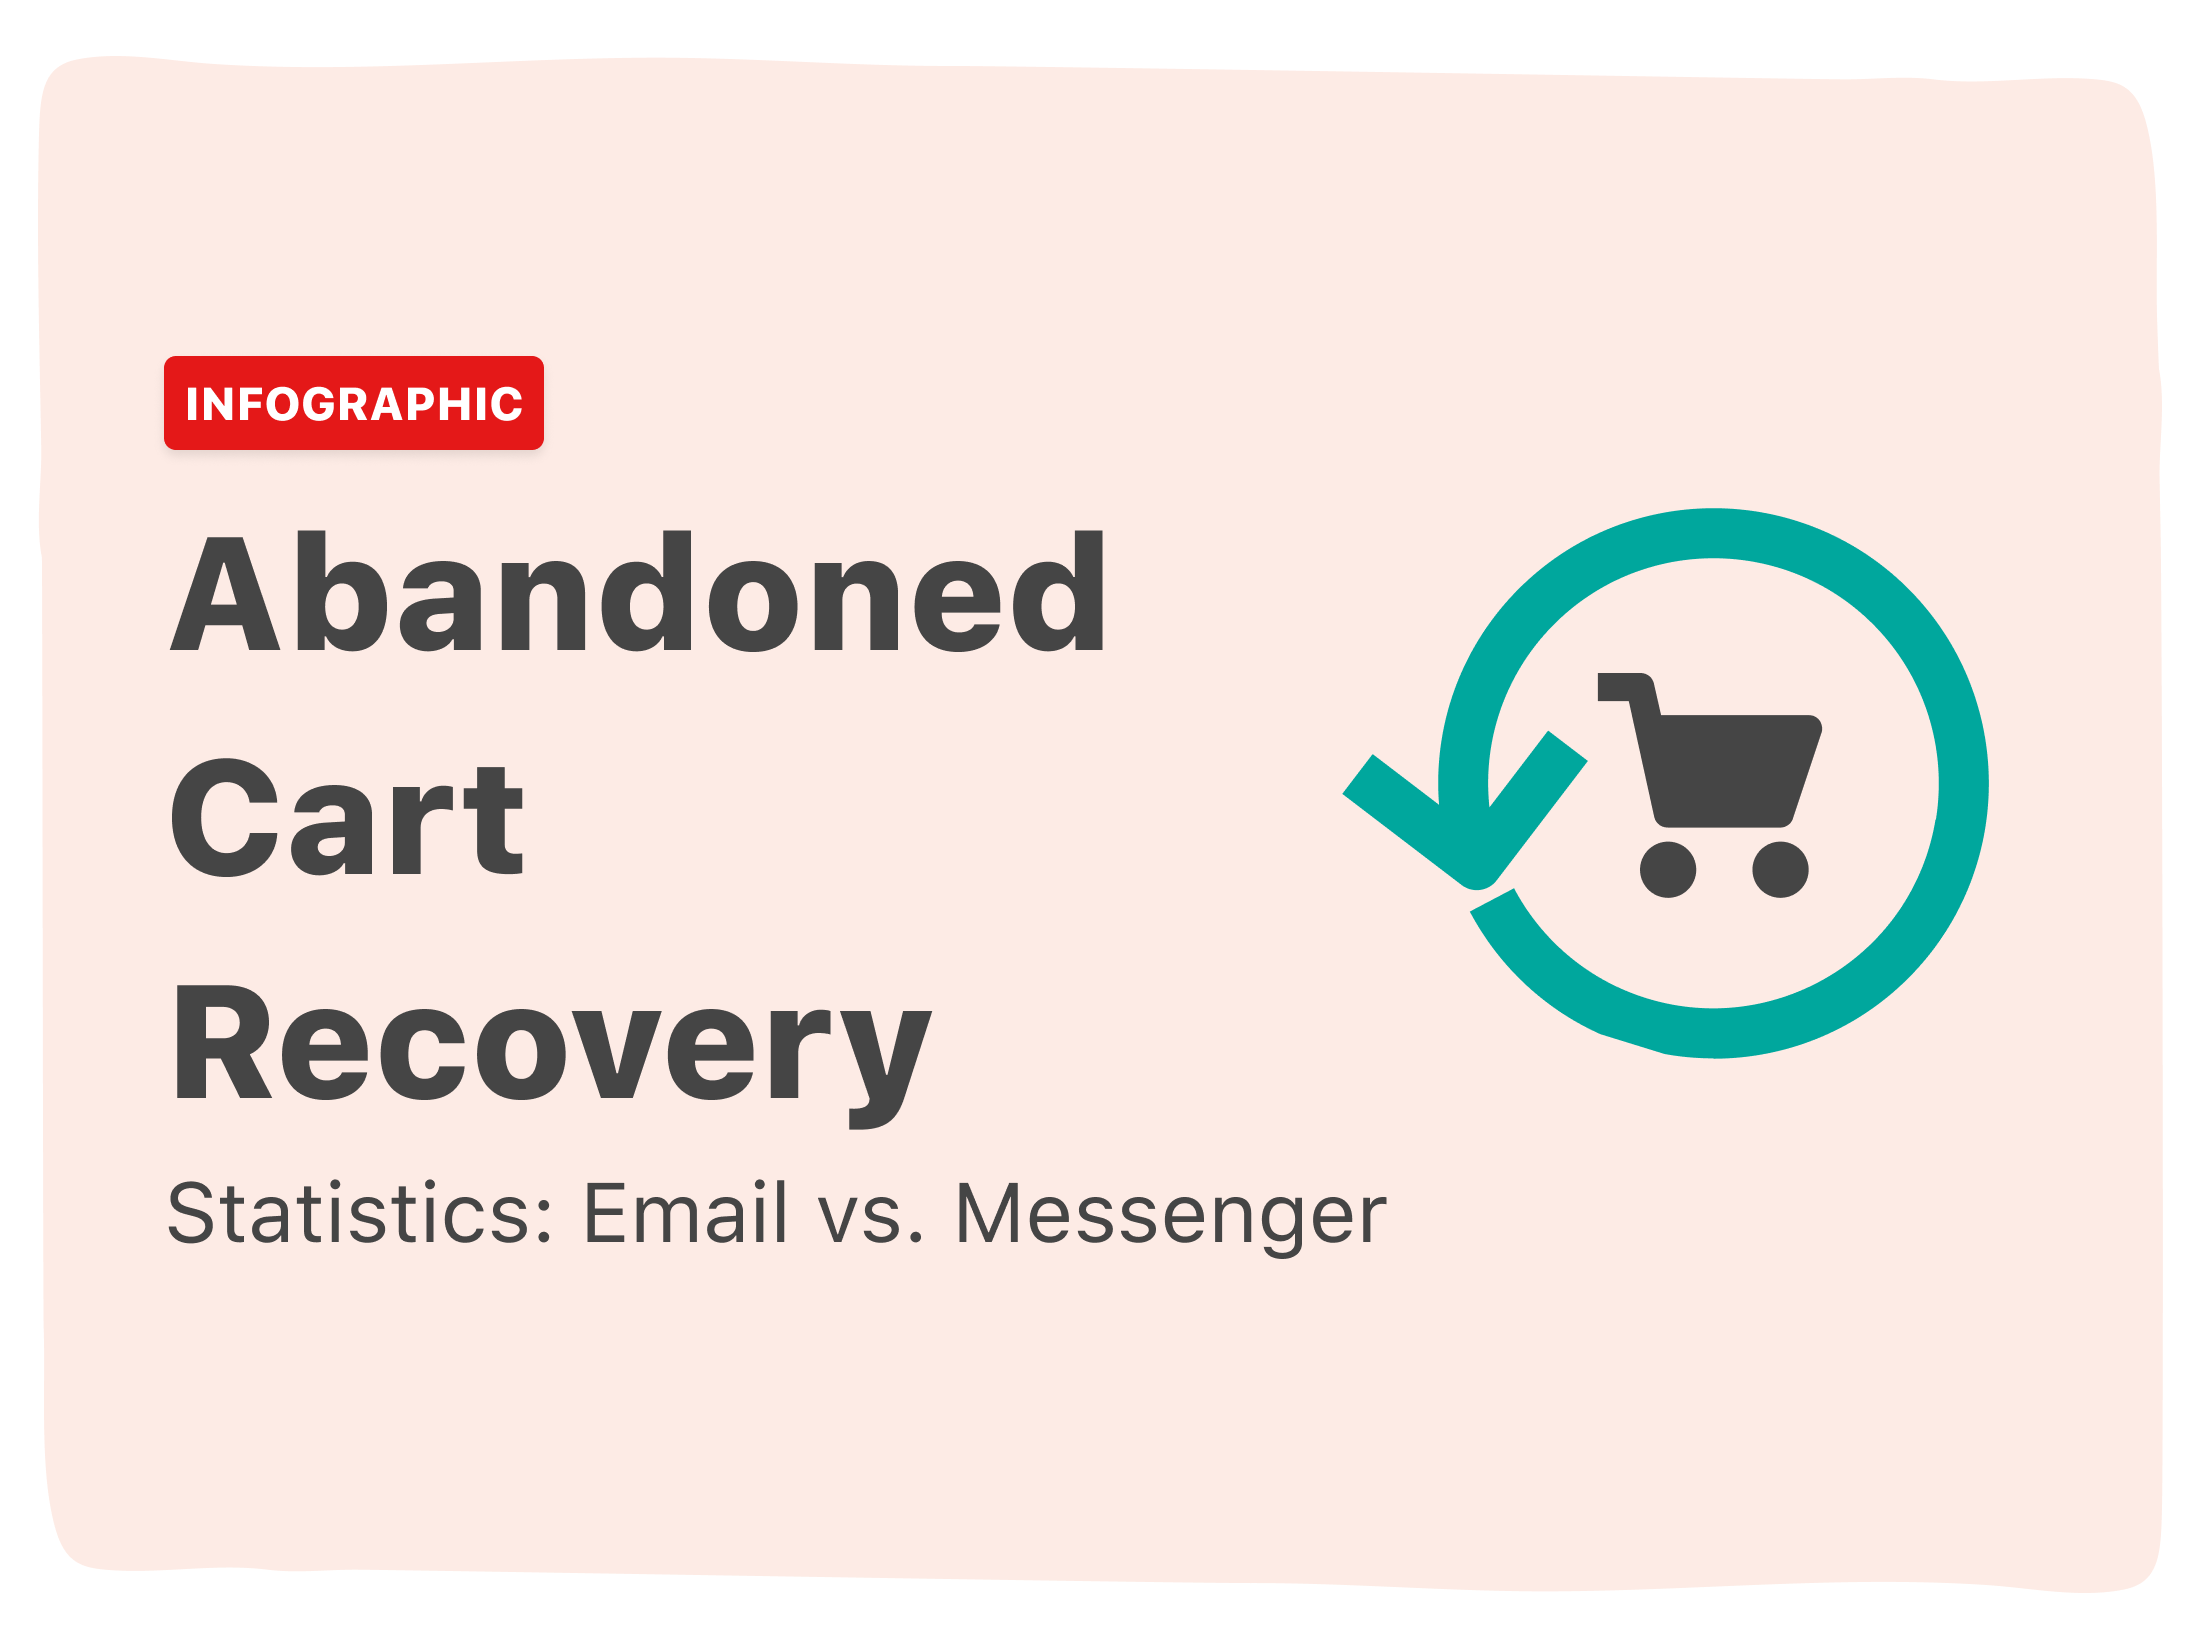 [Infographic] Abandoned Cart Recovery: Email vs. Messenger 2021 (Updated)